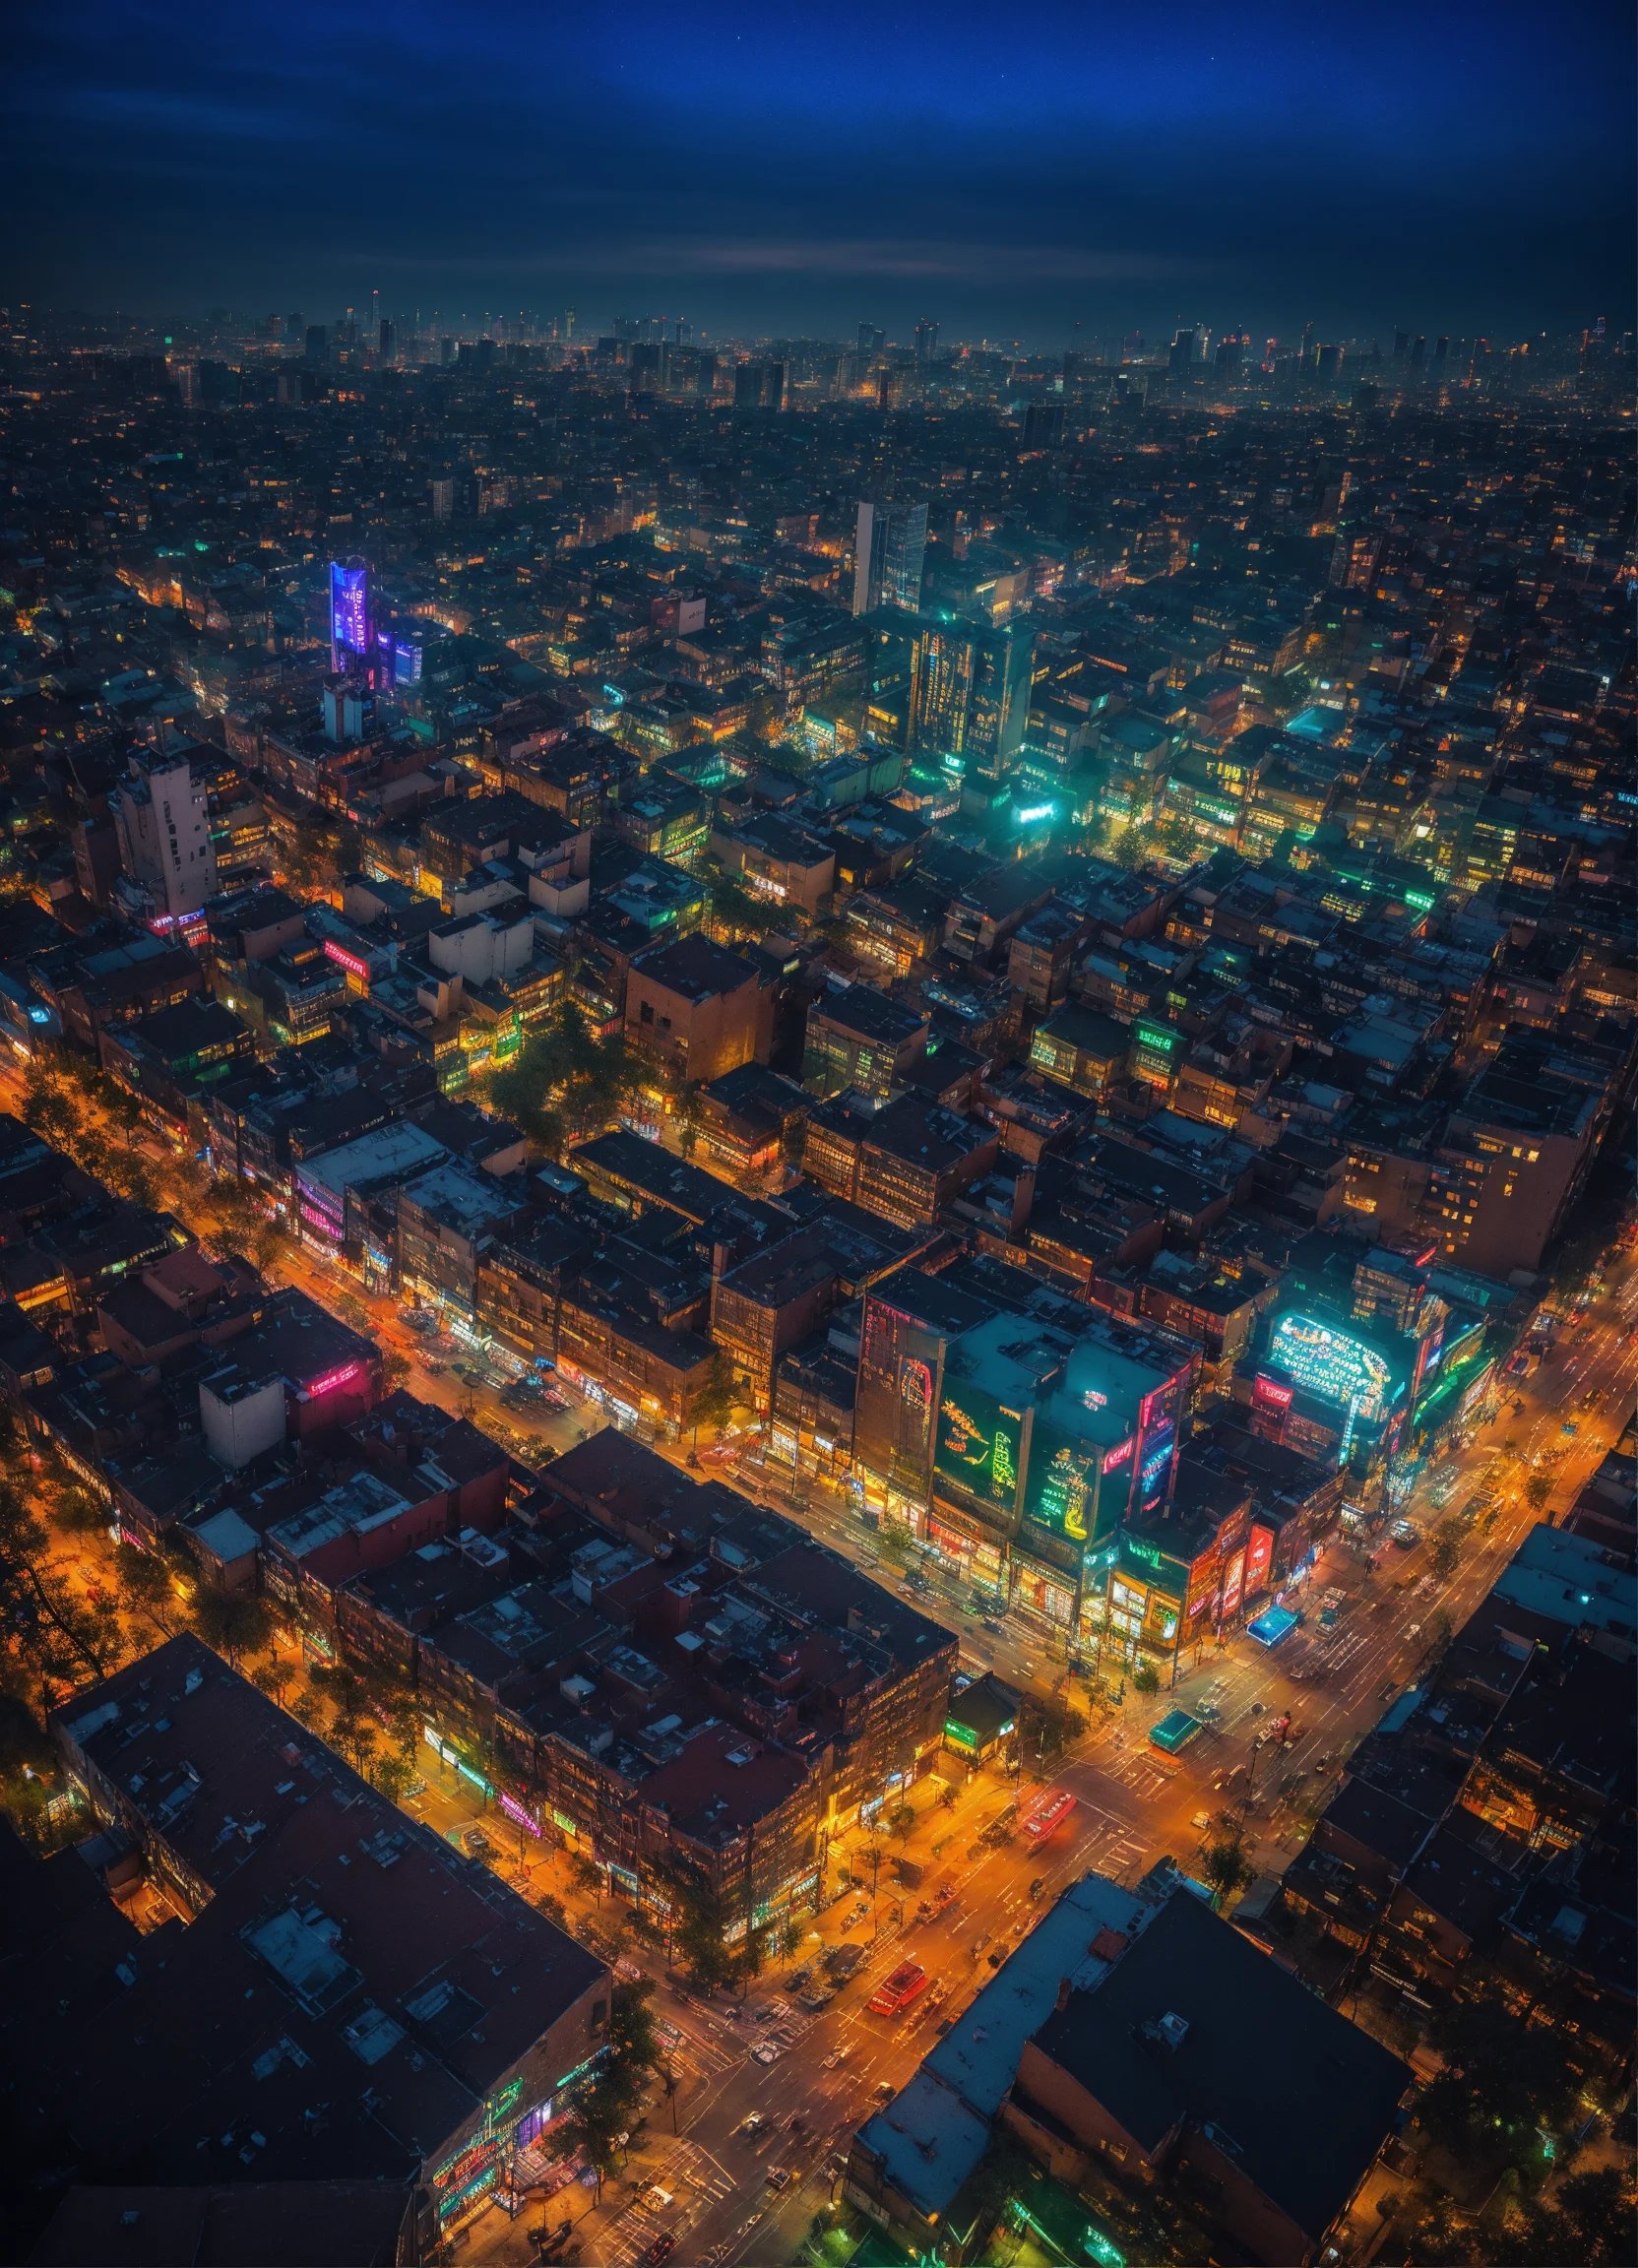 The city at night as seen from the air drone photo (1).jpg